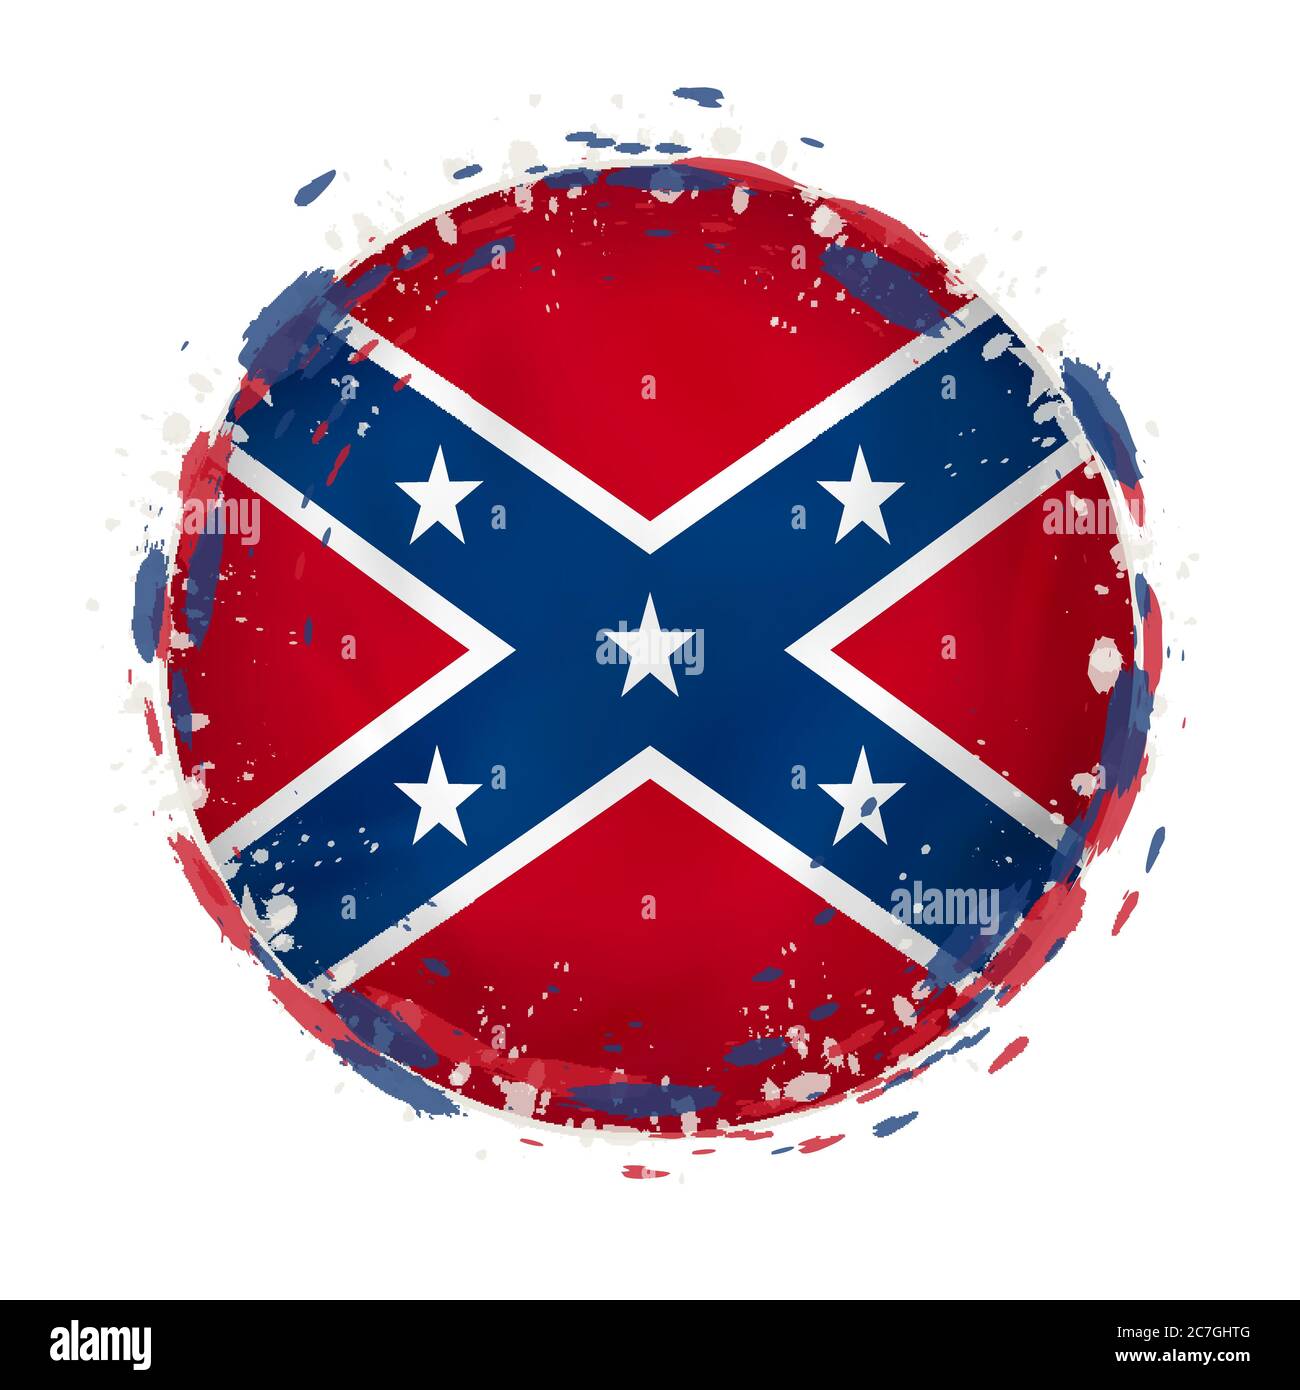 Confederate state army Stock Vector Images - Alamy